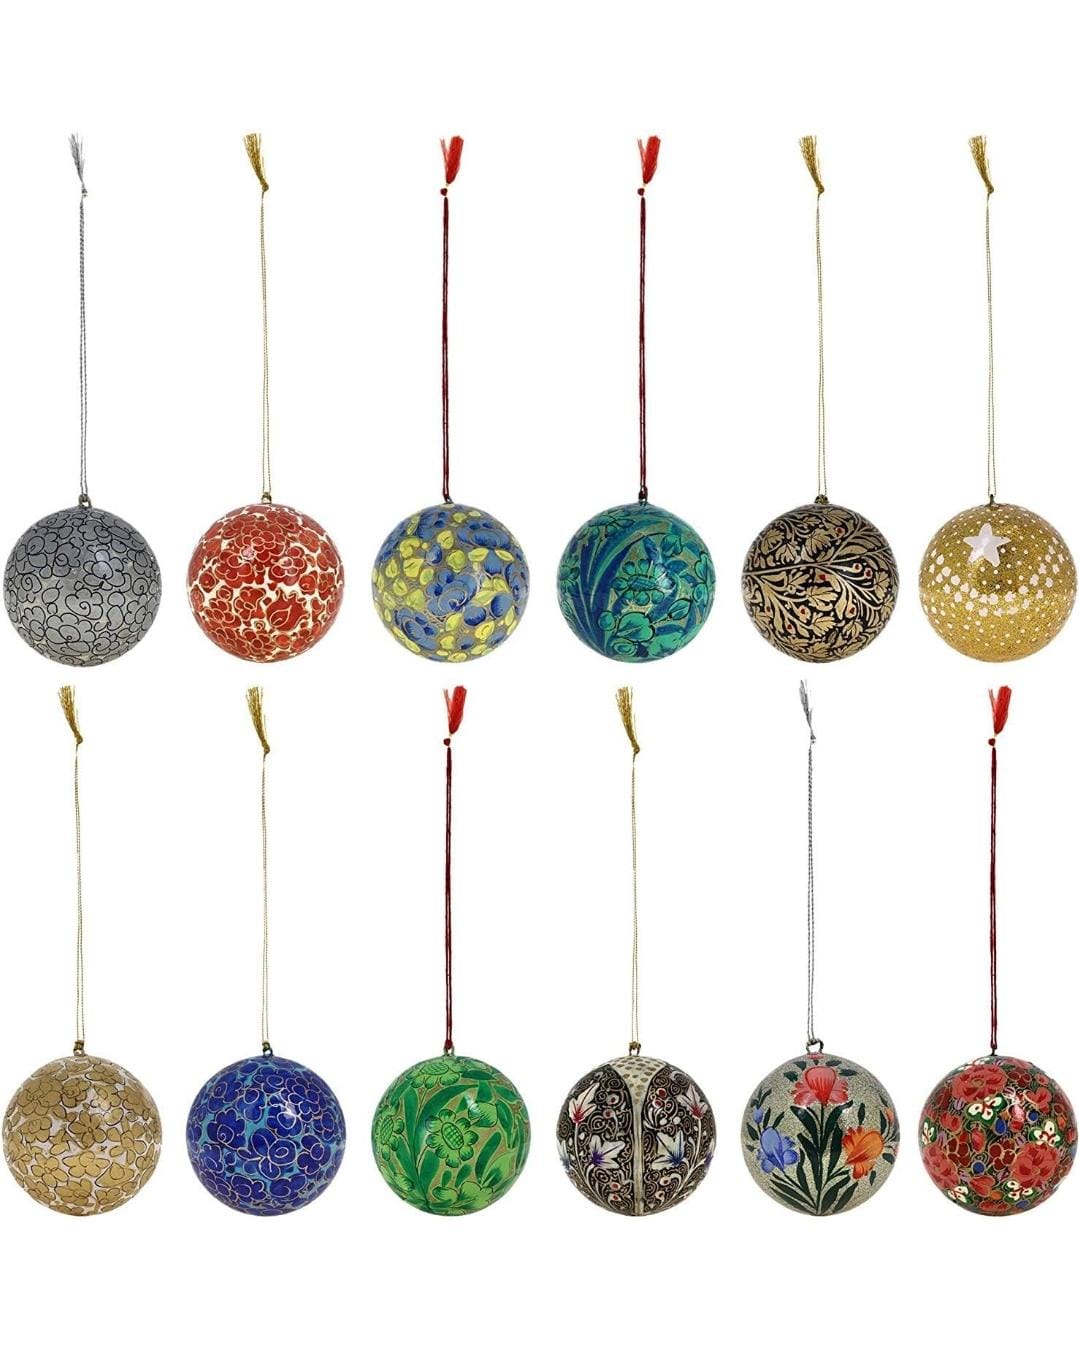 Handmade Christmas ornaments, Hand painted Christmas tree decor, Paper Mache baubles, Hanging christmas Balls, hand crafted from paper mache